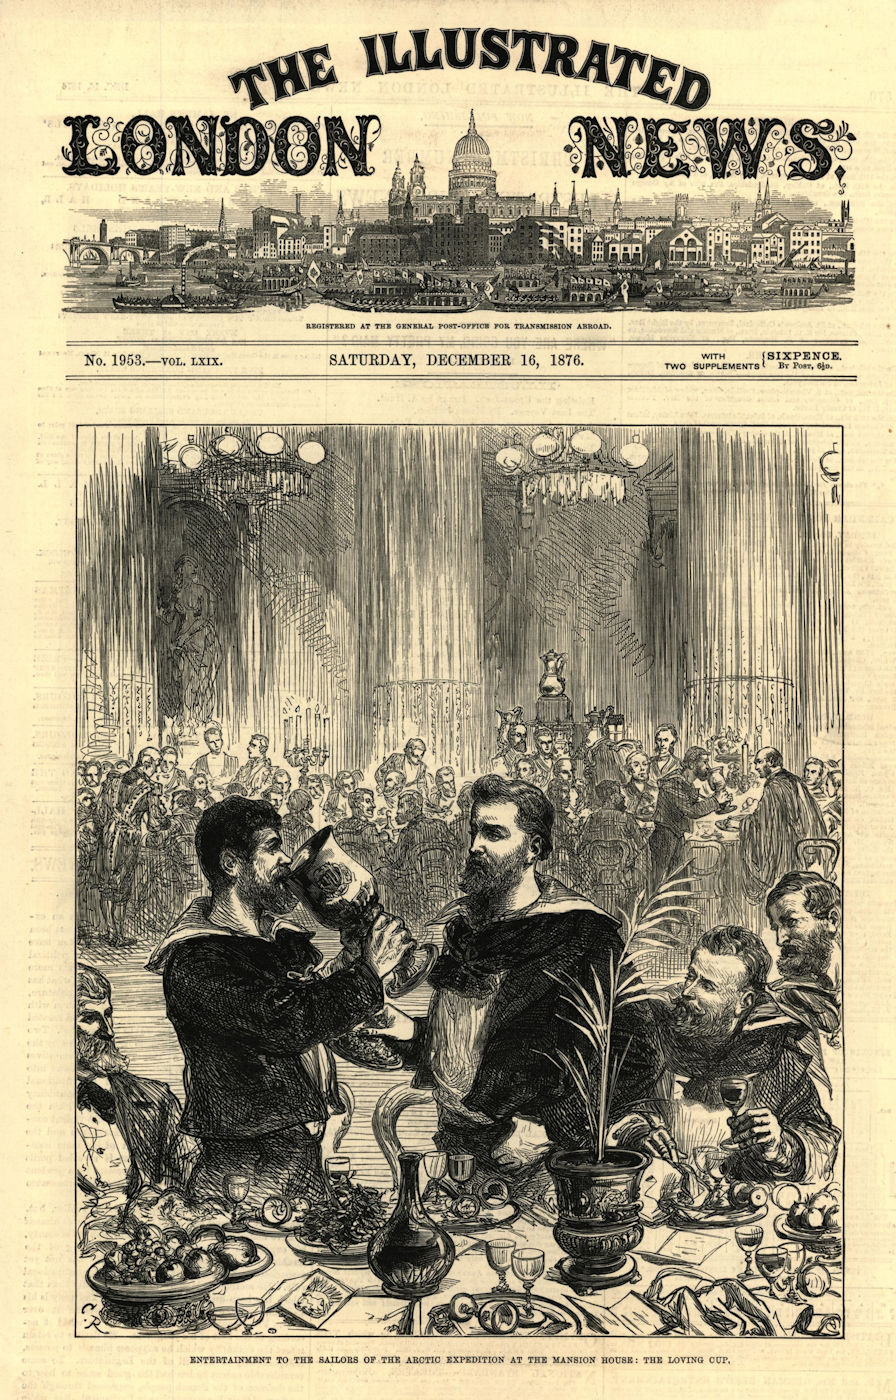 Entertainment to the sailors of the Arctic Expedition at the Mansion House 1876